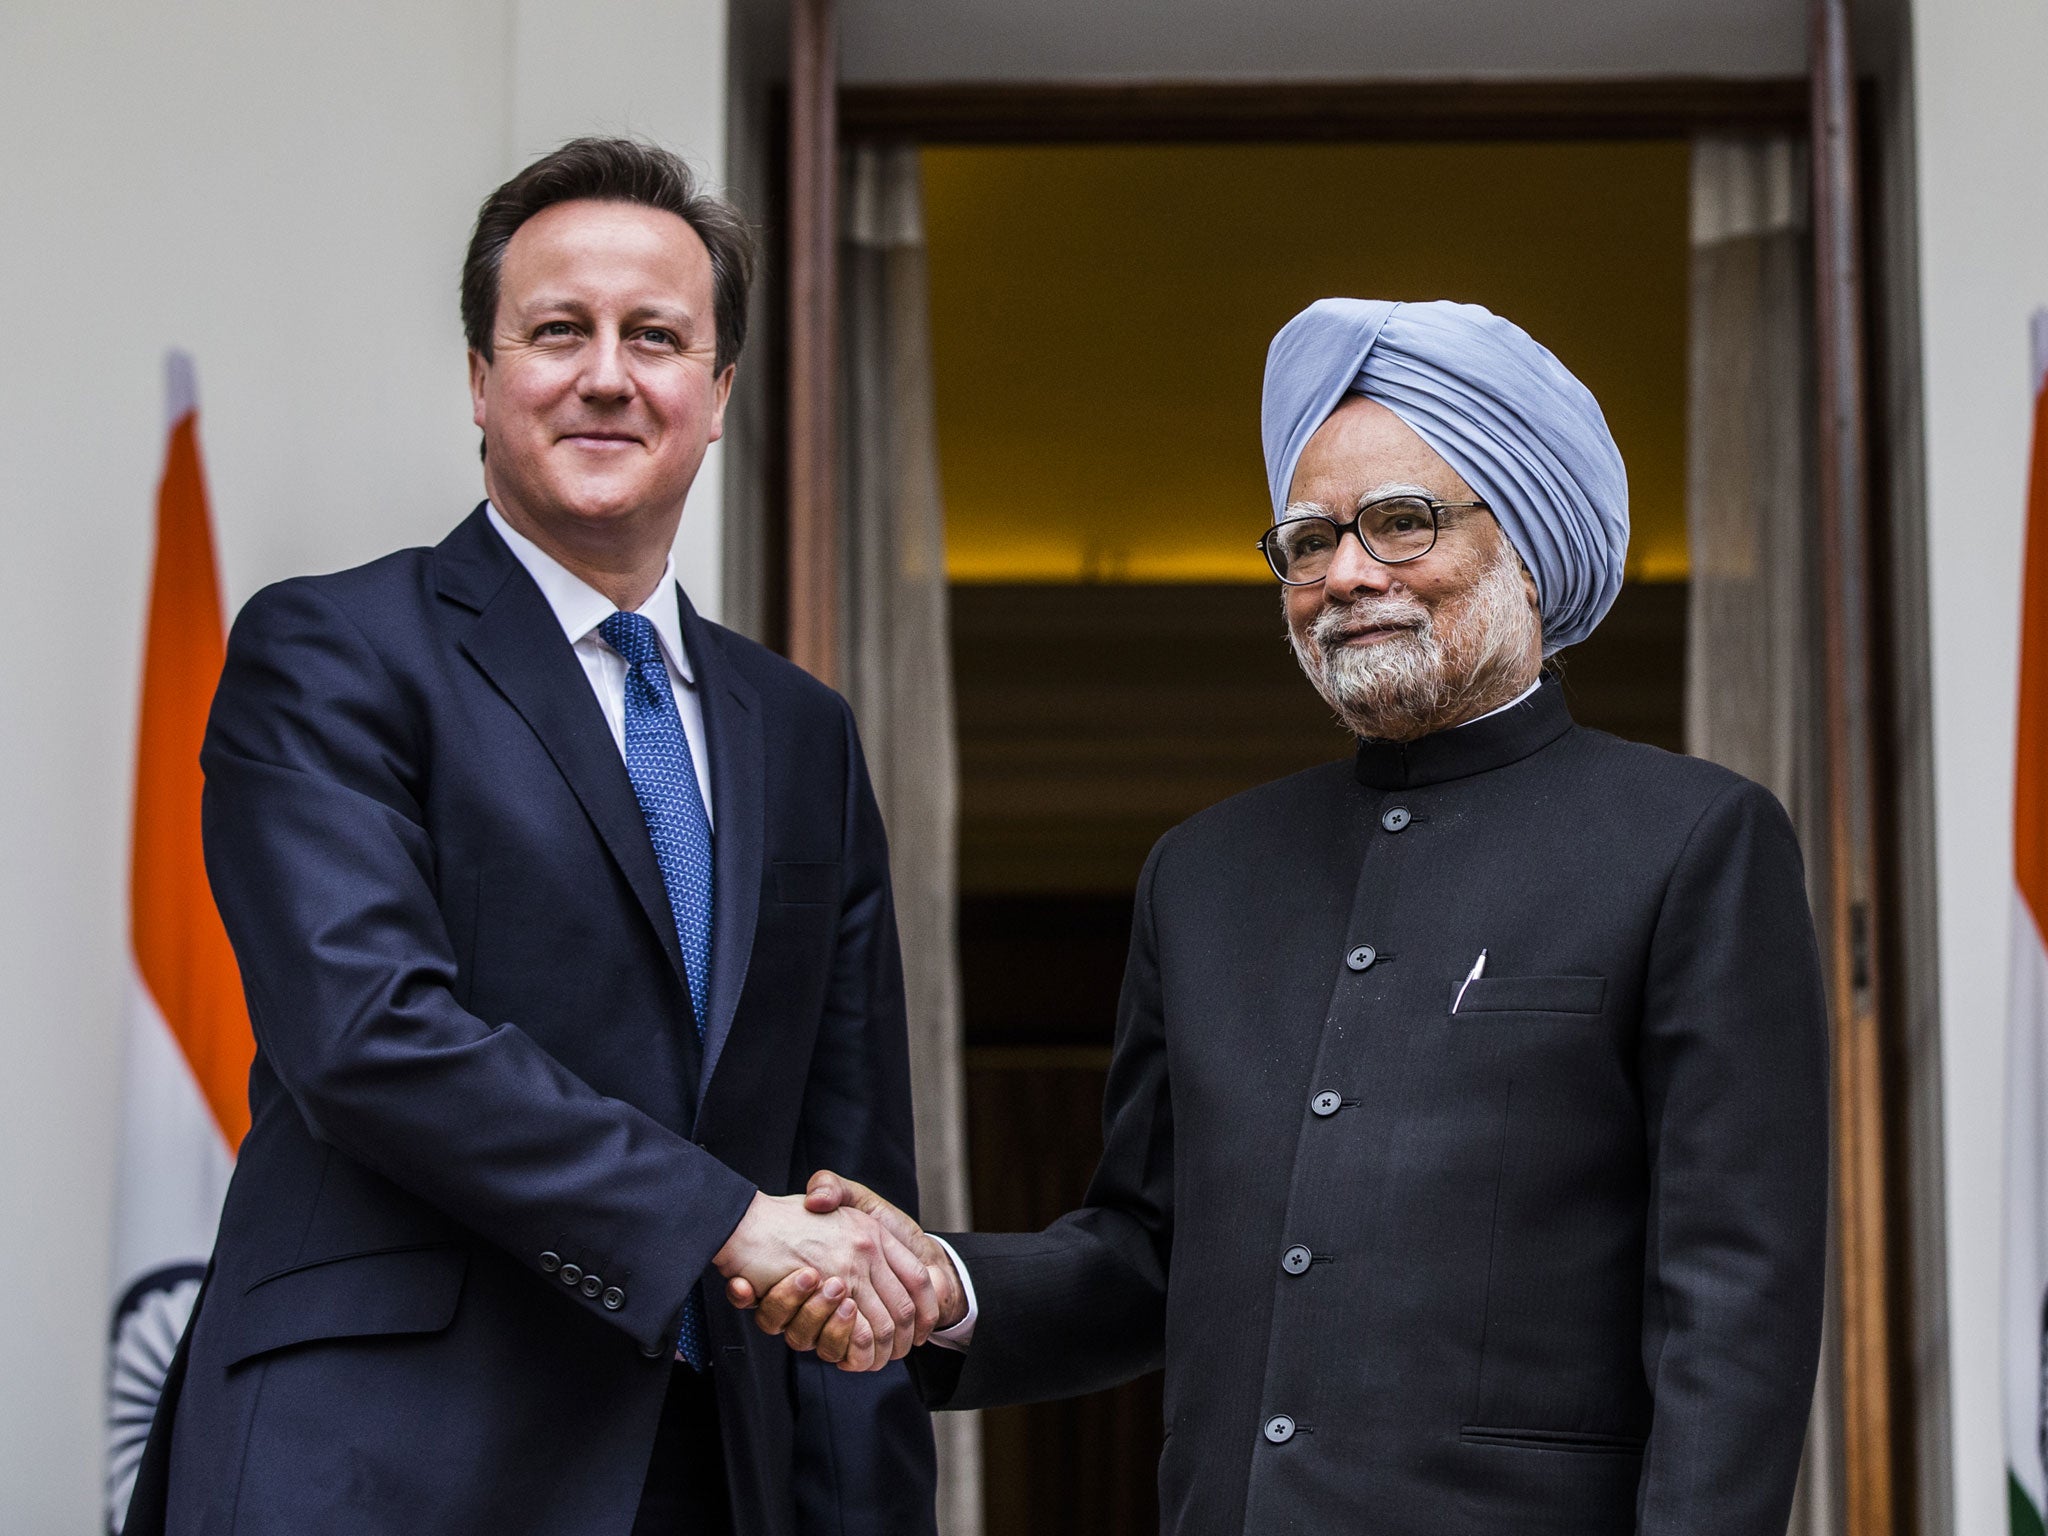 David Cameron has been urged to follow the lead of the Indian premier Manmohan Singh and boycott the summit